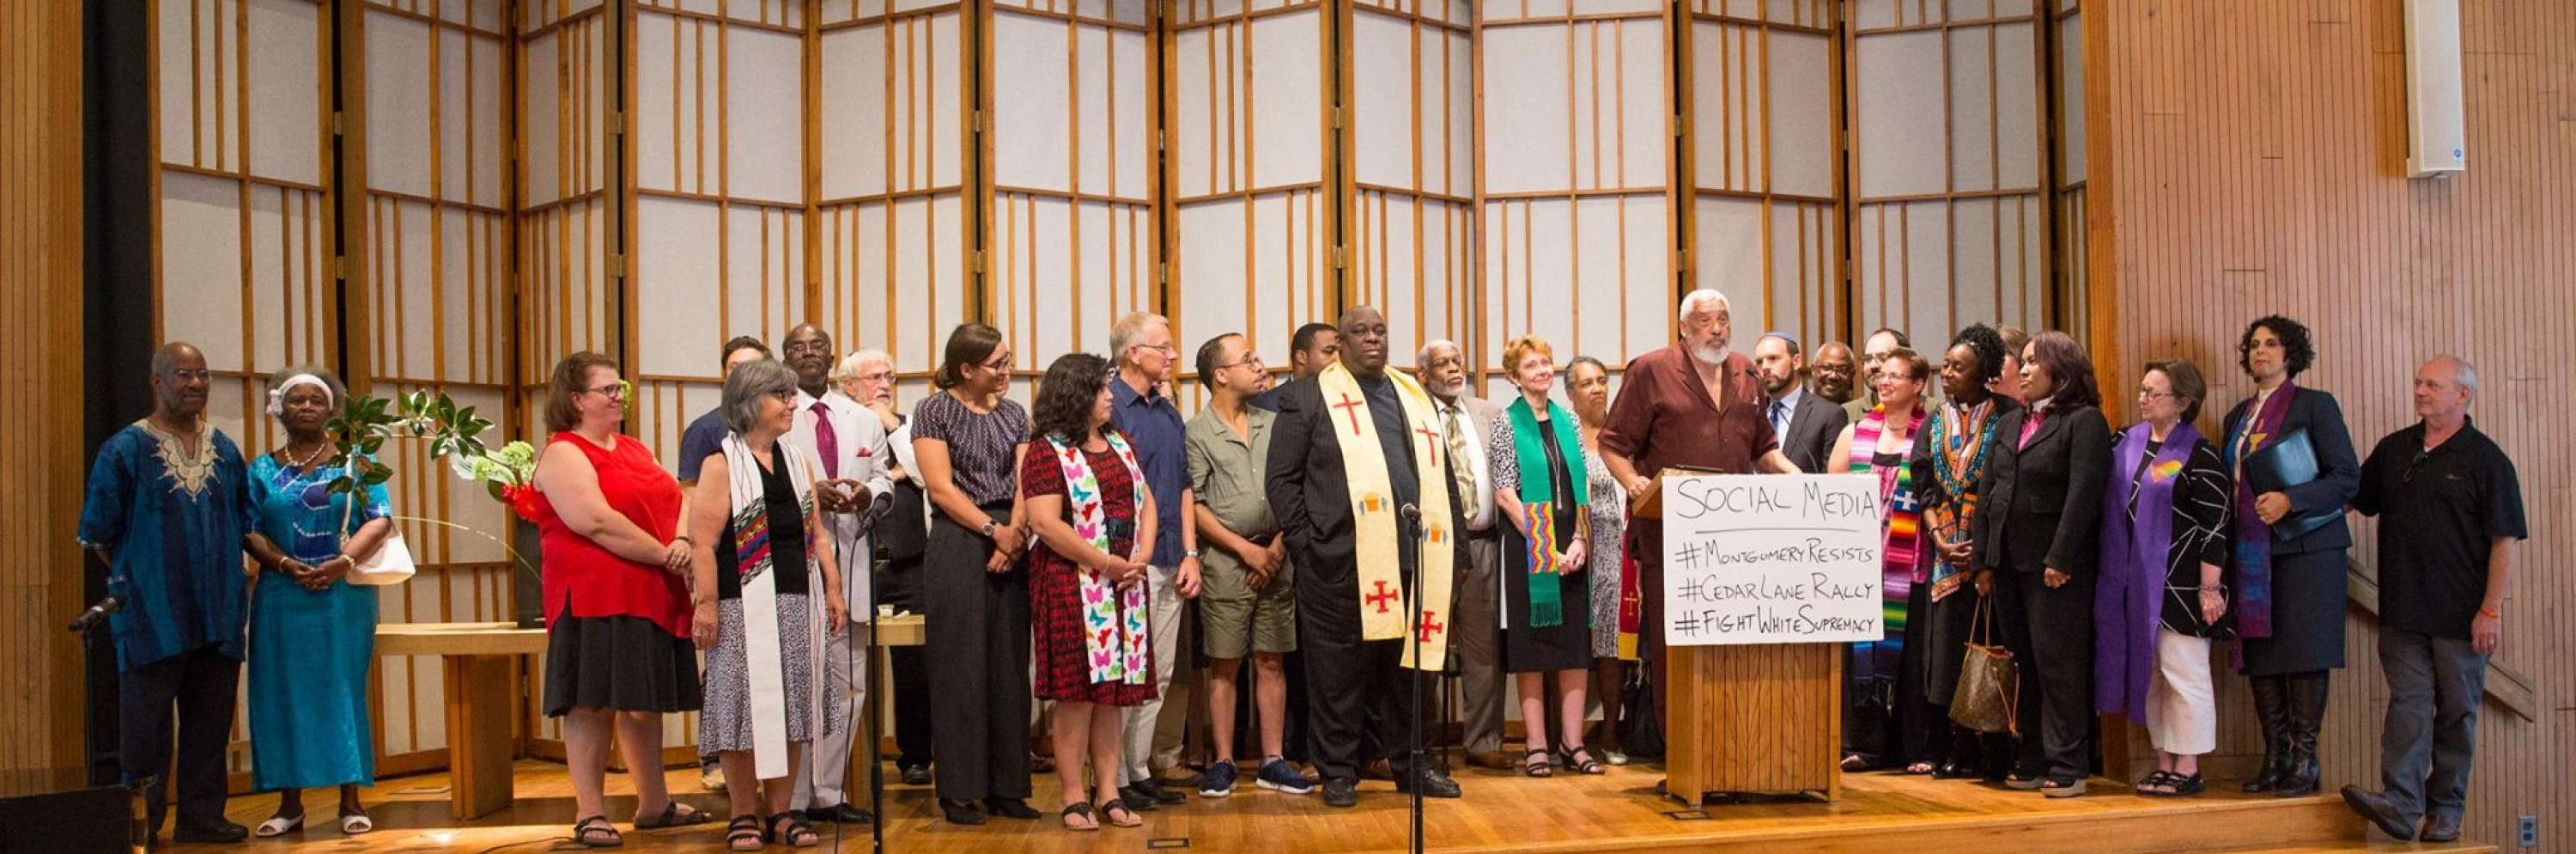 photo of all of the clergy and leaders at the Interfaith Love Over Hate Rally in August 2017